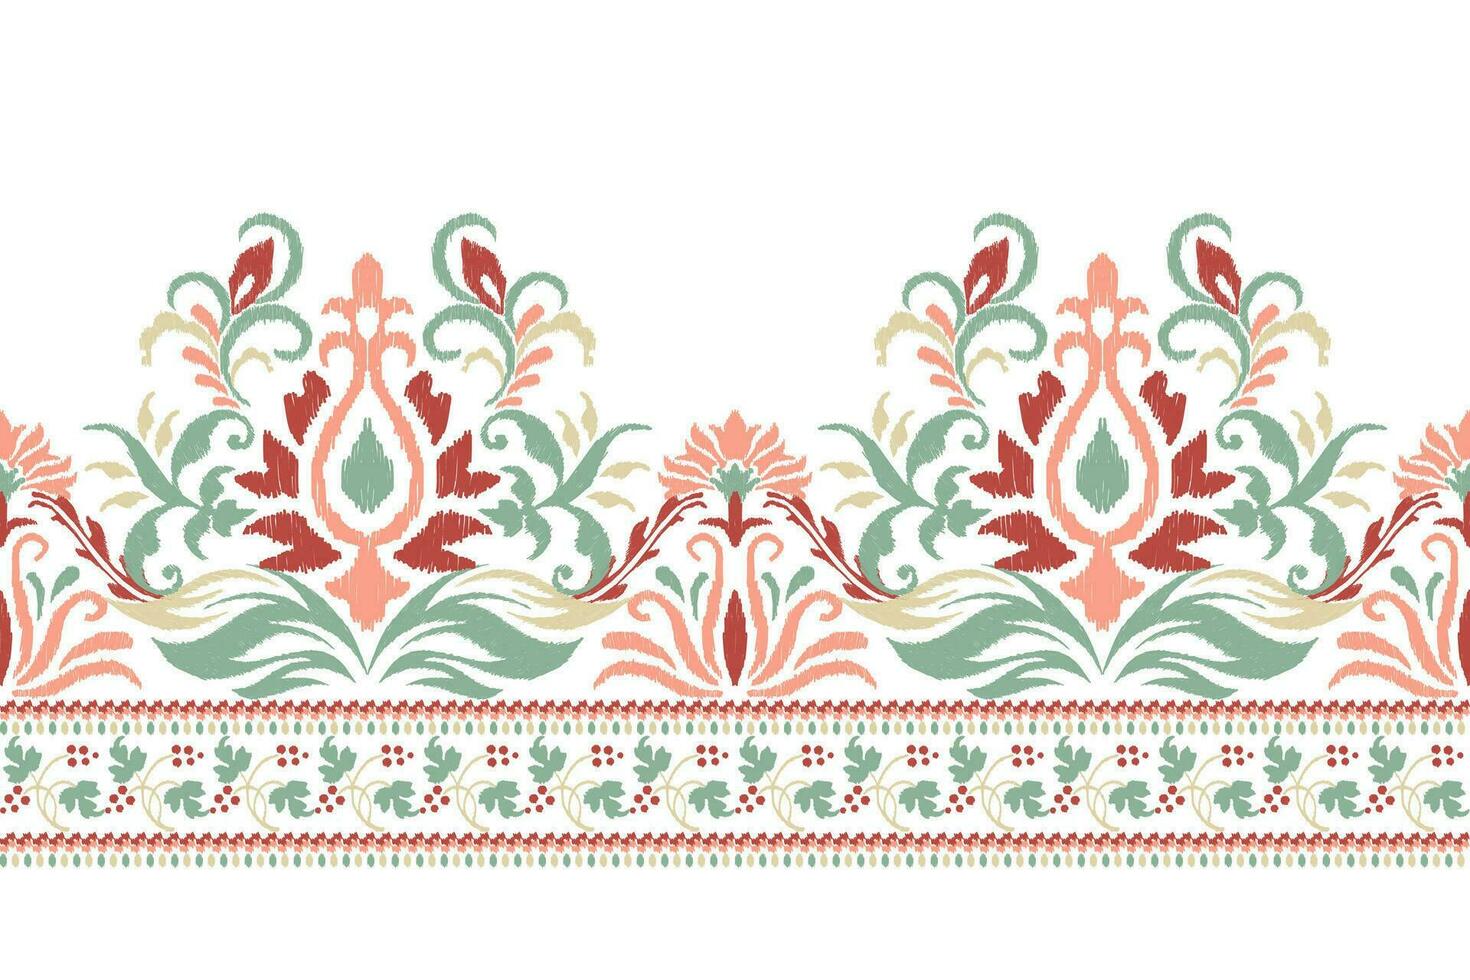 Ikat floral paisley embroidery on white background.Ikat ethnic orientalist pattern traditional.Aztec style abstract illustration.design for texture,fabric,clothing,wrapping,decoration,sarong,scarf. vector